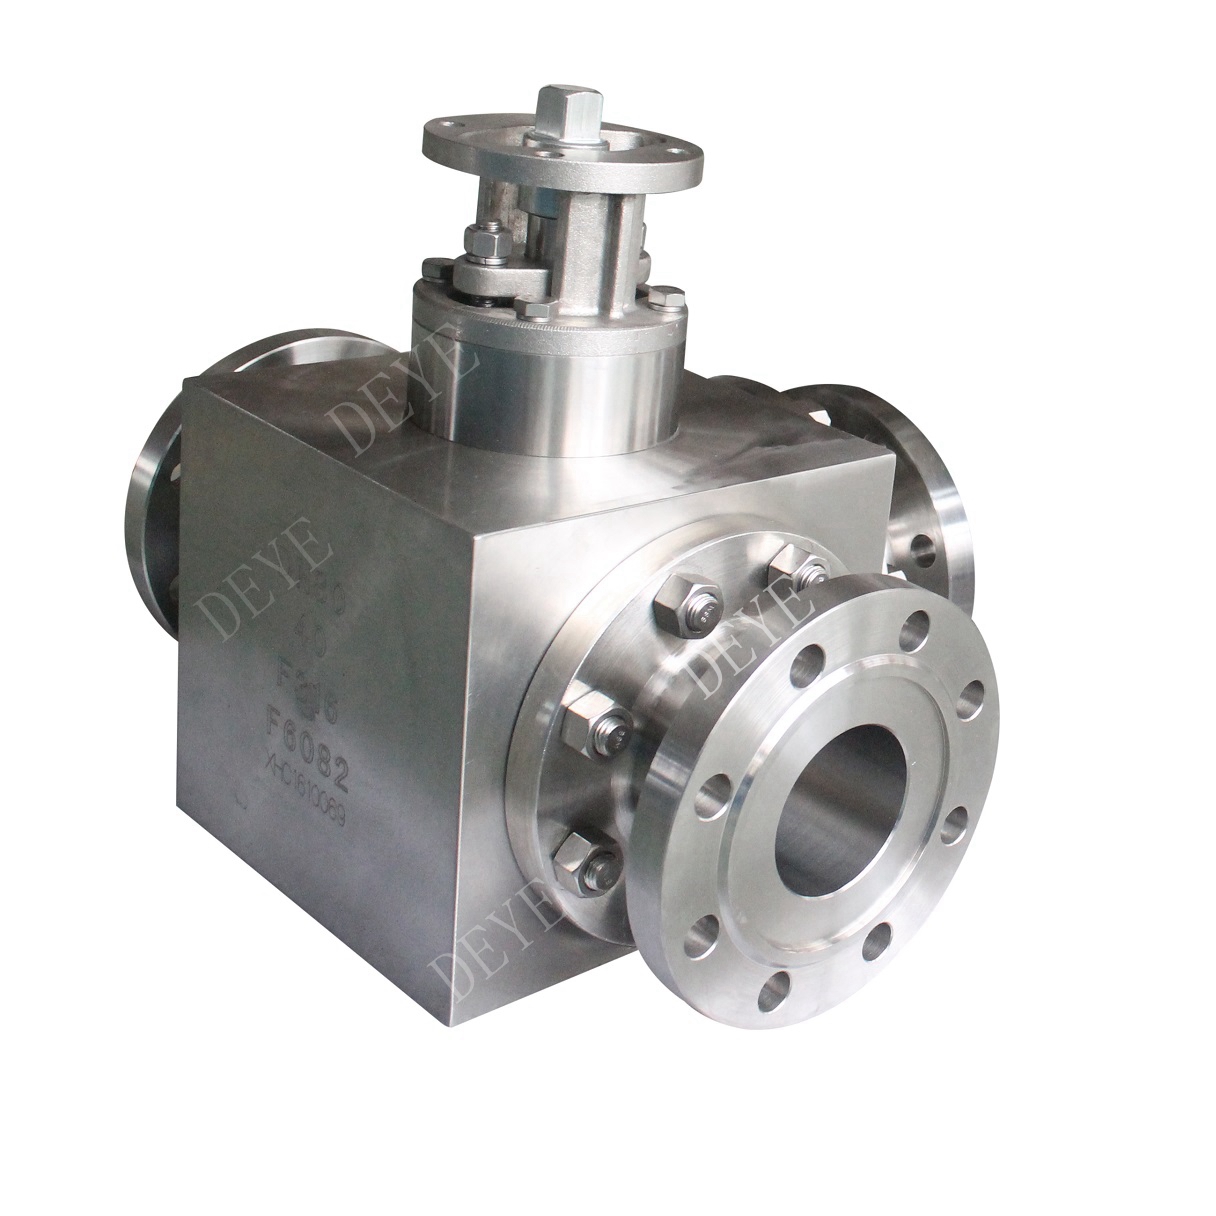 Wholesale Price China 600# Lug Check Valve -
  300LBS stainless steel 3-way ball valve with Flanged ends  BV-300-3WYF – Deye